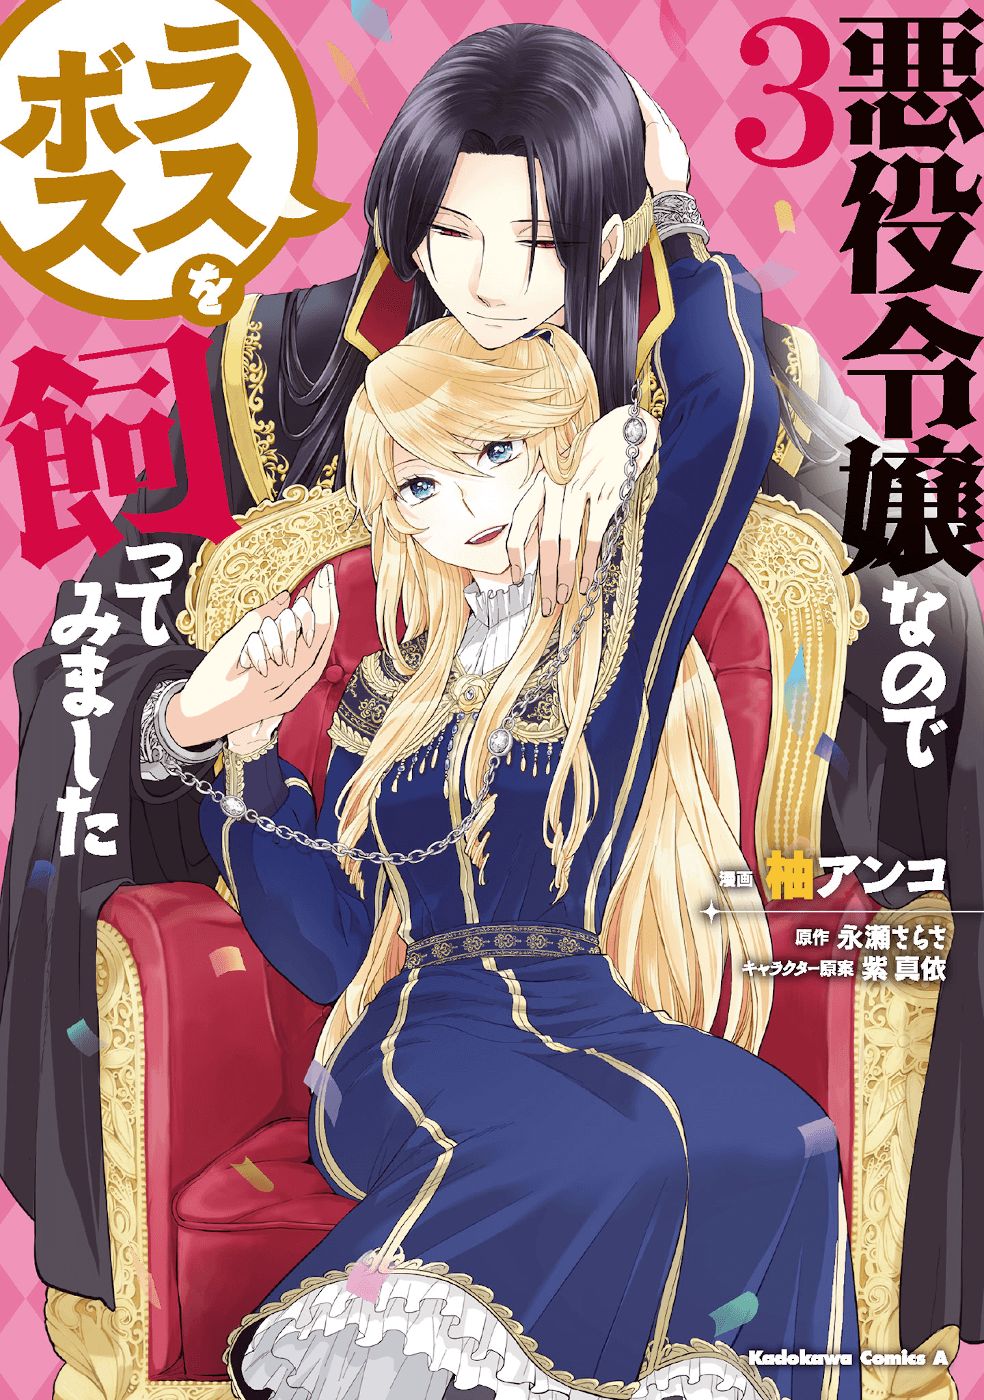 Read I'm a Villainous Daughter, so I'm going to keep the Last Boss Manga  English [New Chapters] Online Free - MangaClash